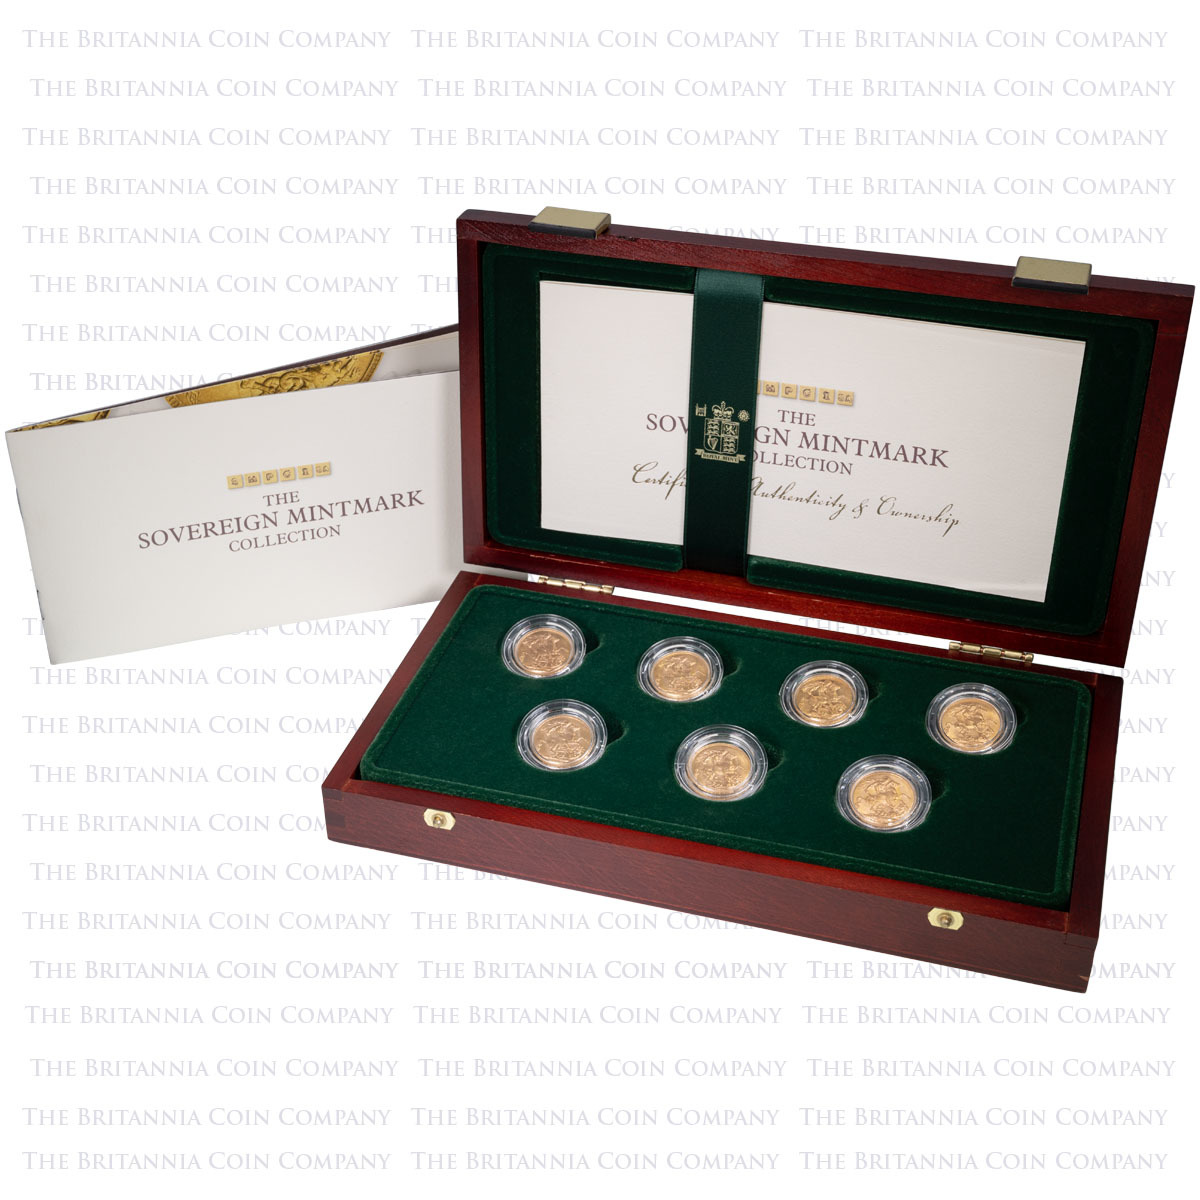 King George V Gold Full Sovereign Seven Coin Mintmark Collection boxed